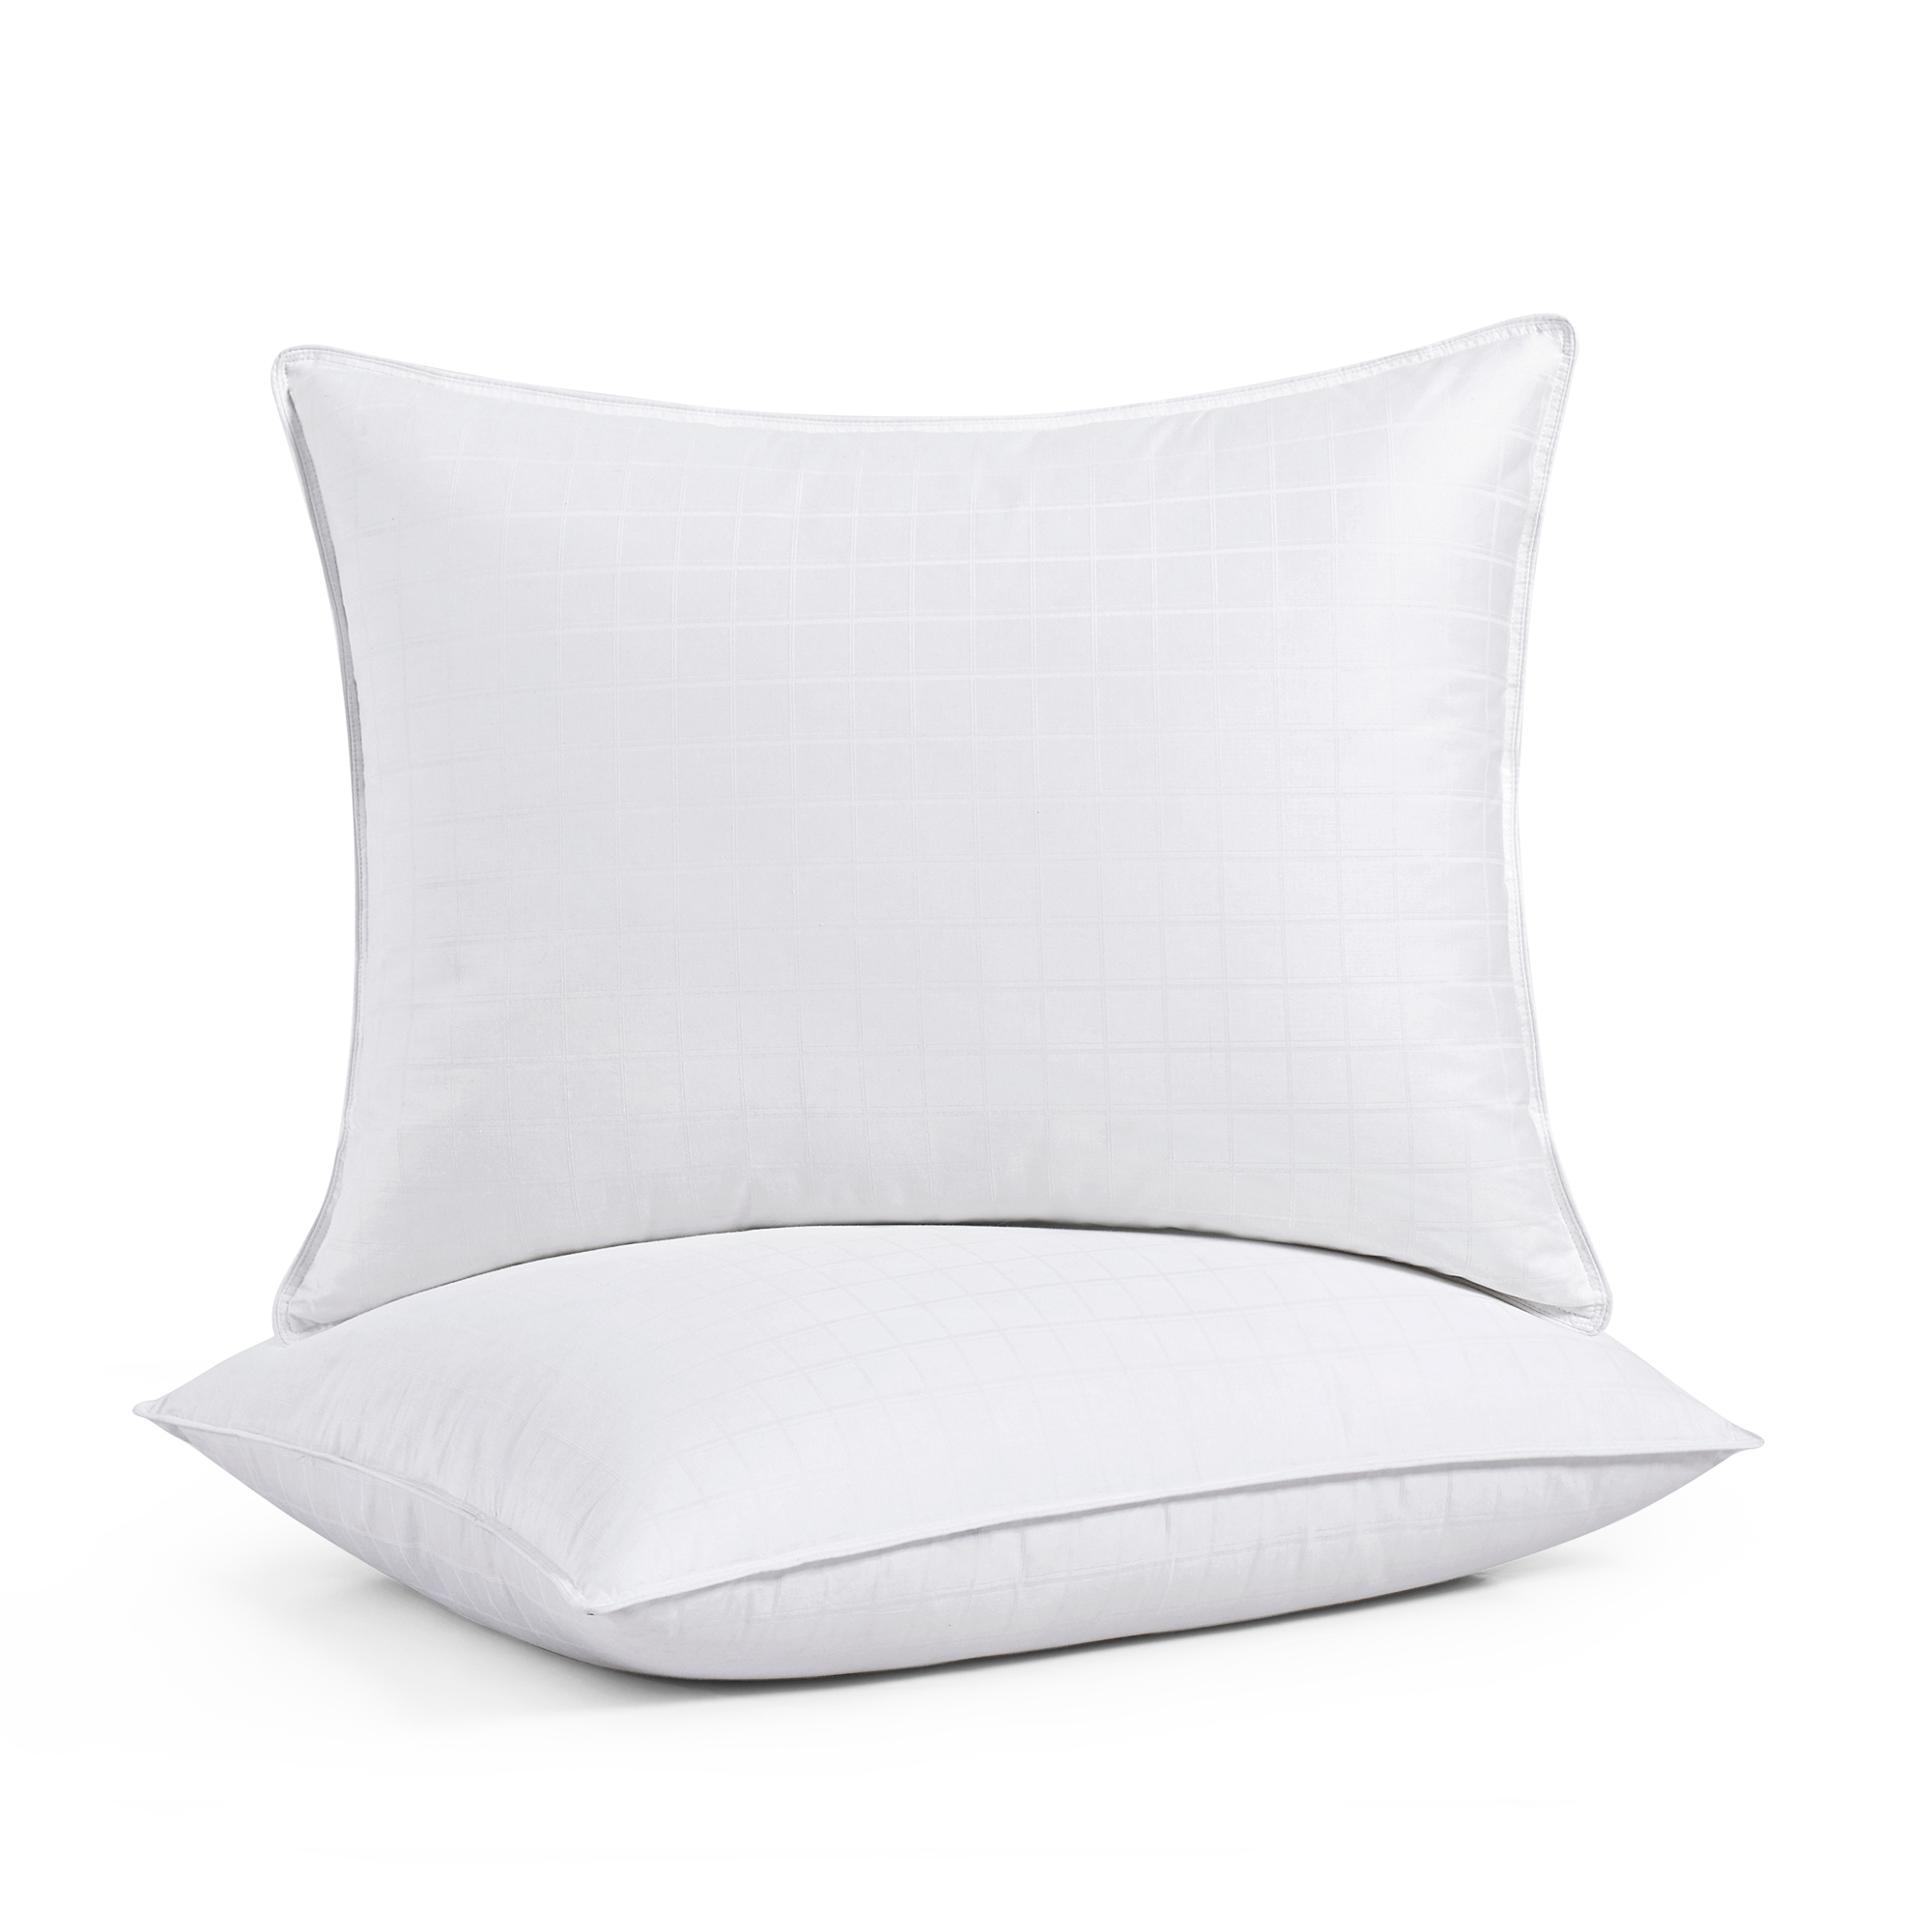 Hotel Luxury Premium White Goose Down Pillow For Sleeping, Pillow-in-a- Pillow Design, Cotton Fabric, Side And Back Sleepers, Set Of 2 - Kin